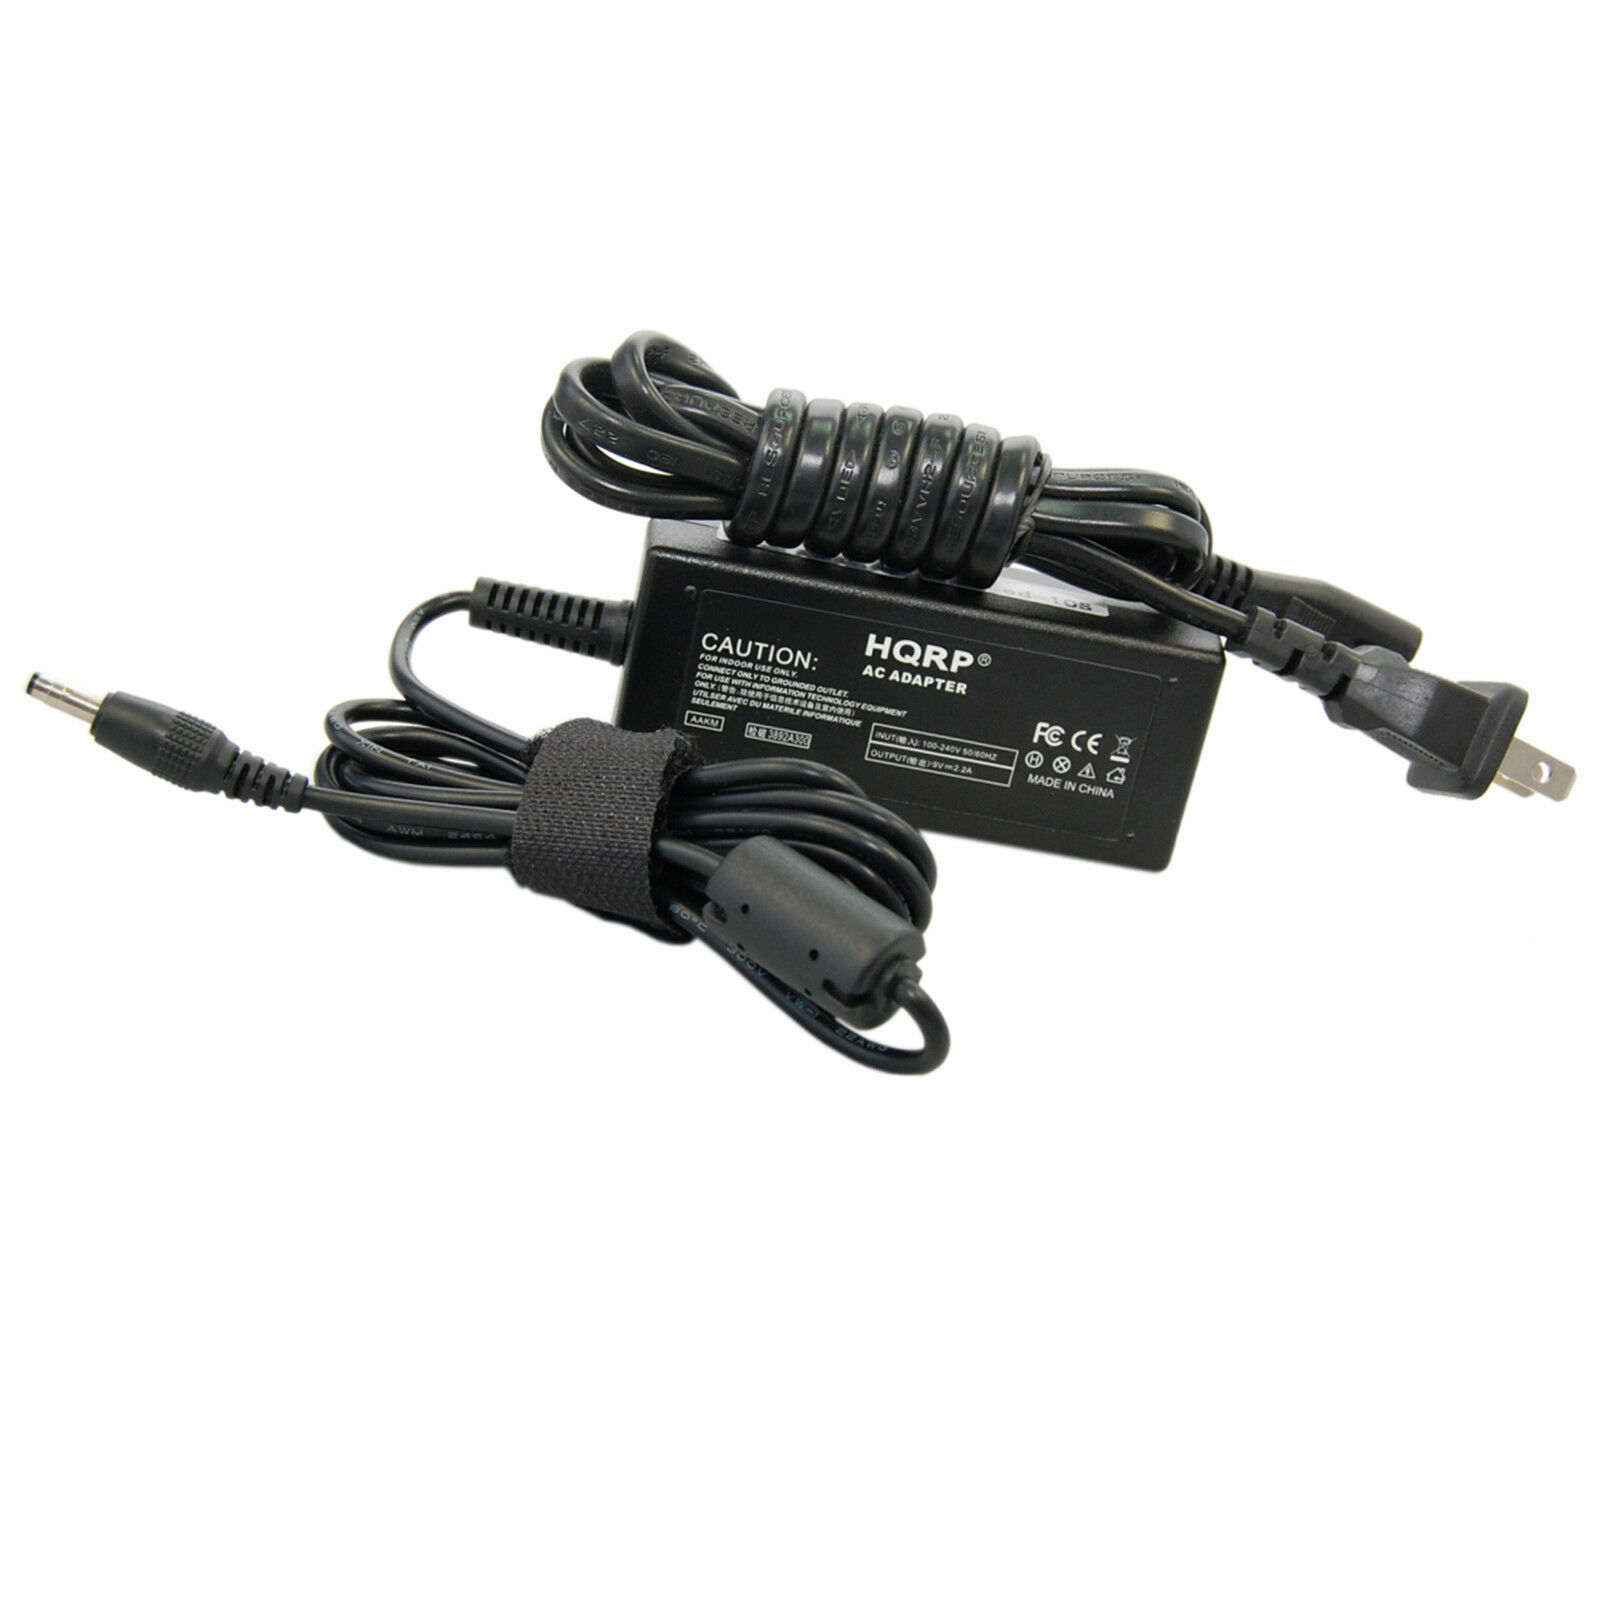 AC Adapter Charger For NOCO Genius Boost Pro GB150 GB70 GB75 Jump Starter XGC4 Compatible Brand: NOCO GB150 GENIUS BOO